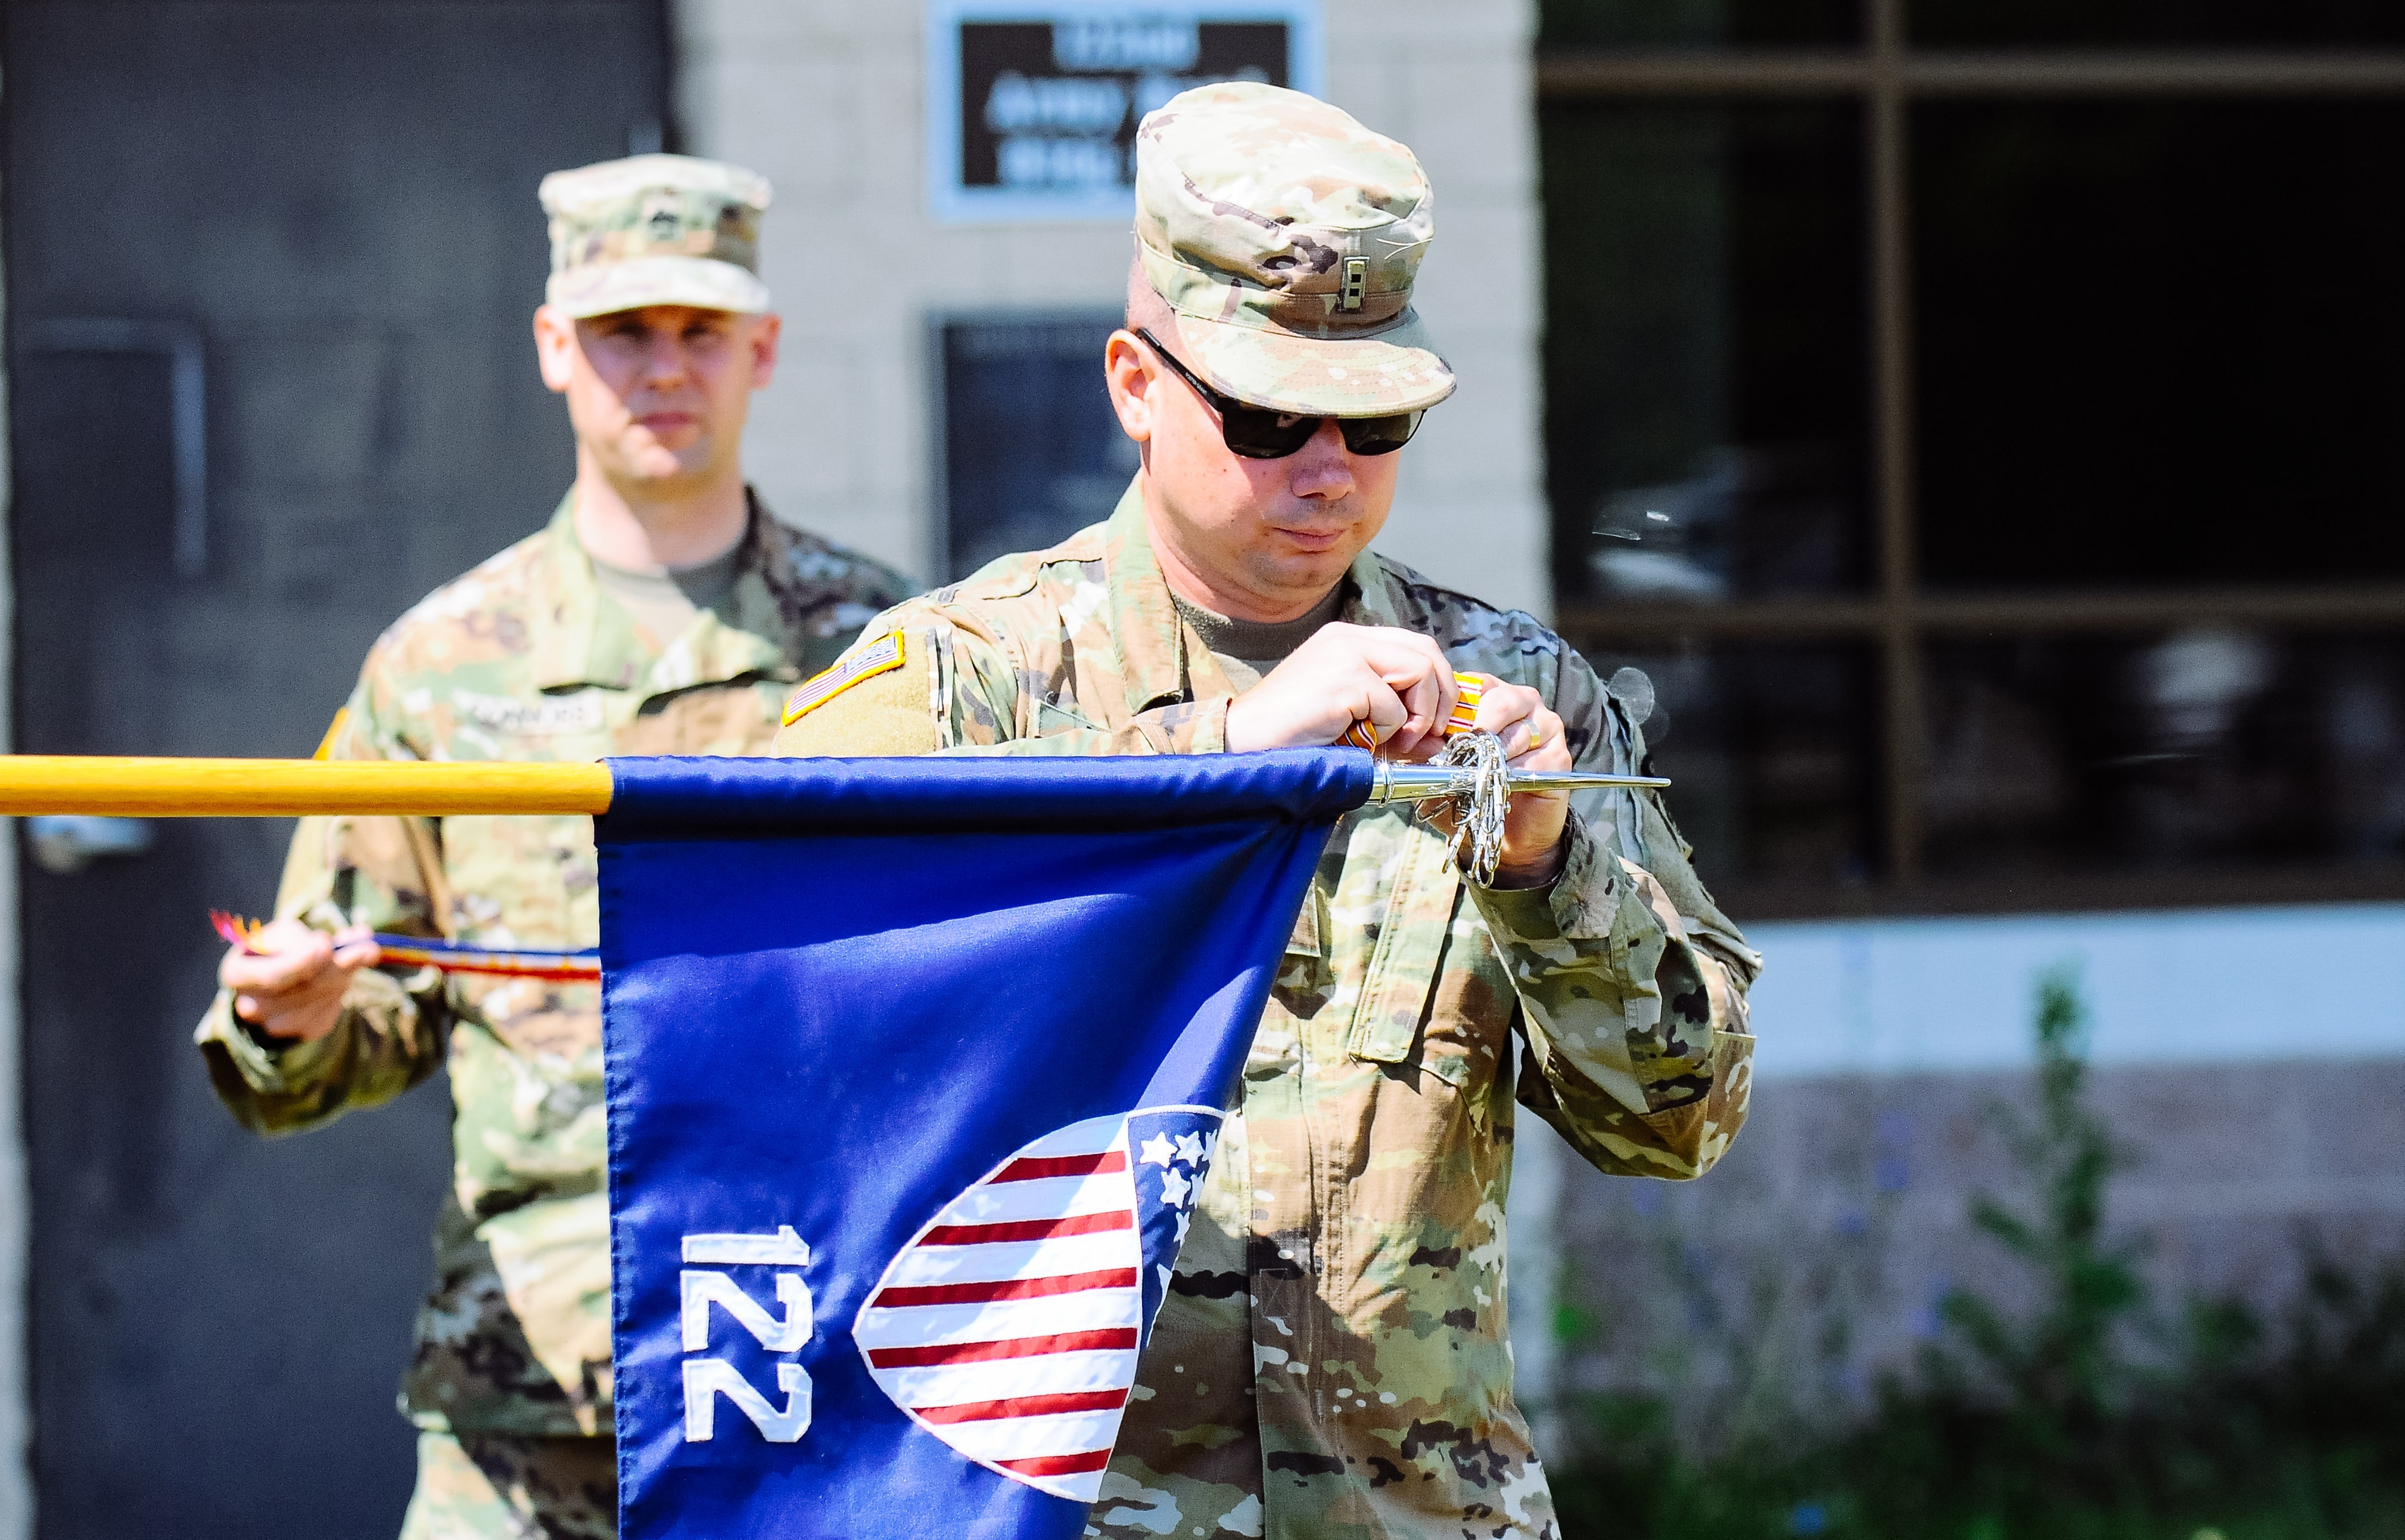 Some national guard units haven't followed order to ditch confederate items: report